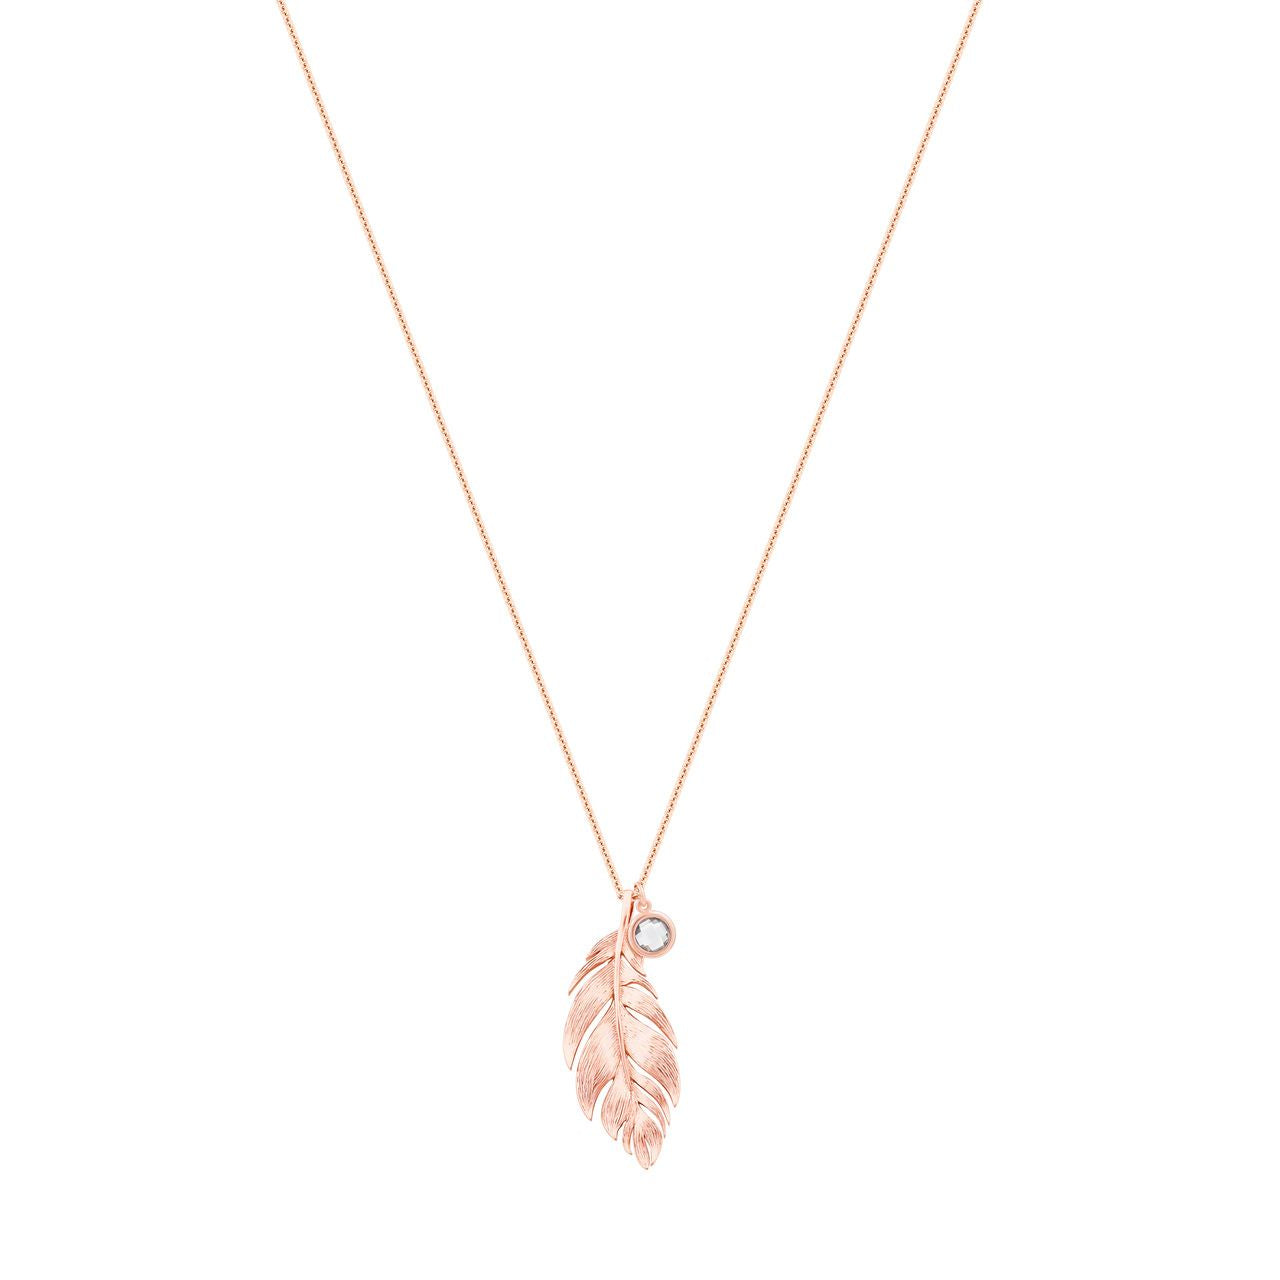 Long Rose Gold Feather Pendant & Grey CZ Charm by Tipperary  The Tipperary Long ADJ Rose Gold Feather Pendant & Grey CZ Charm is a timeless and elegant piece of jewellery. The long, rose gold feather pendant complements the grey CZ charm, giving the piece an ornate and sophisticated finish. Crafted by Tipperary, this necklace is sure to be a treasured item.